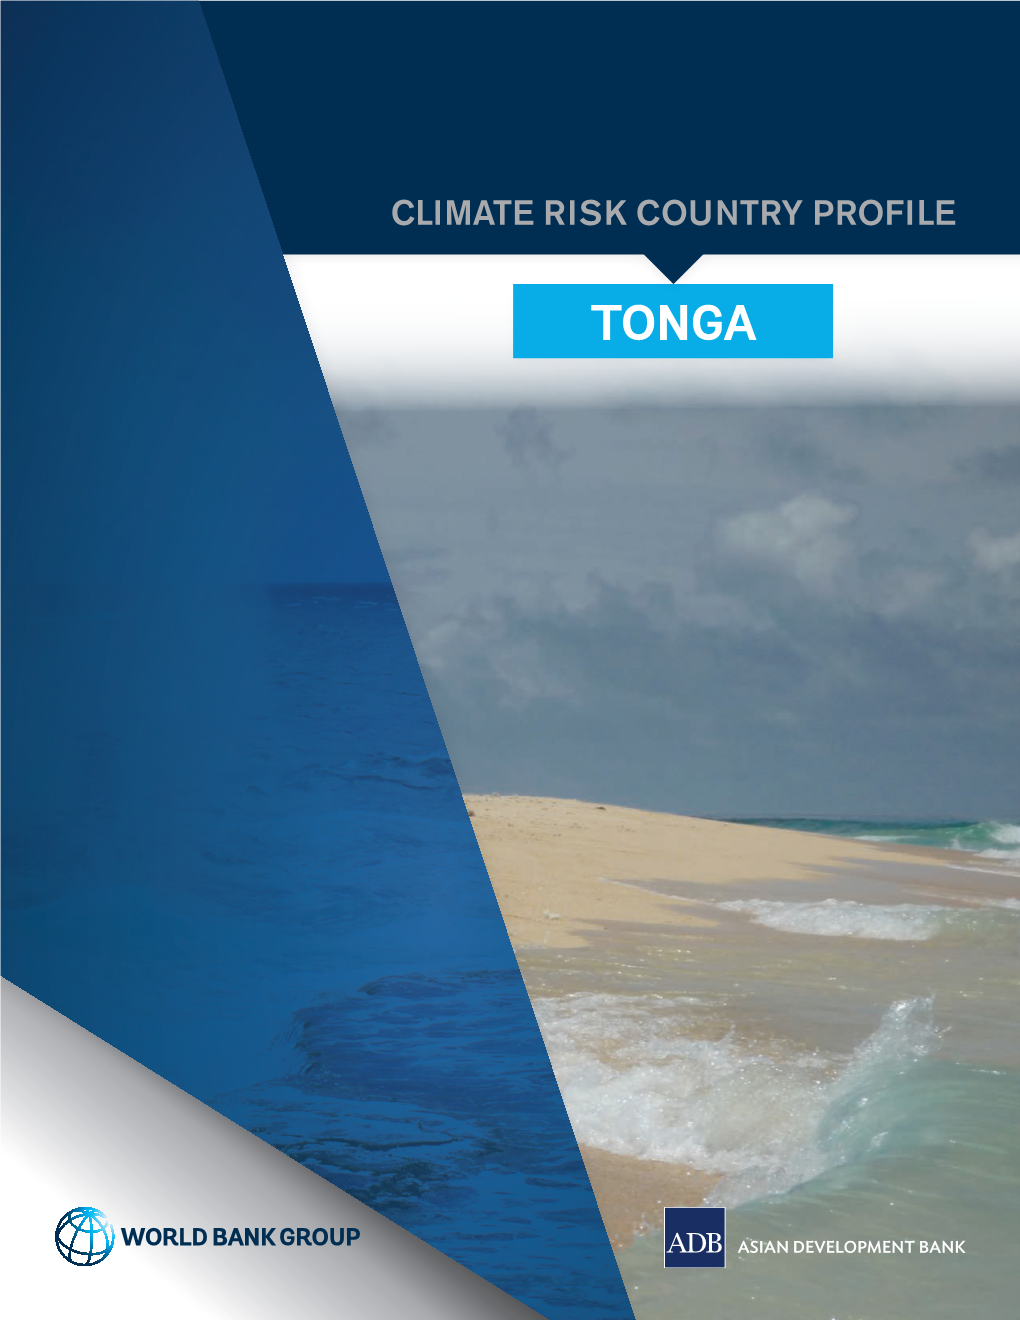 Climate Risk Country Profile: Tonga (2021): the World Bank Group and the Asian Development Bank